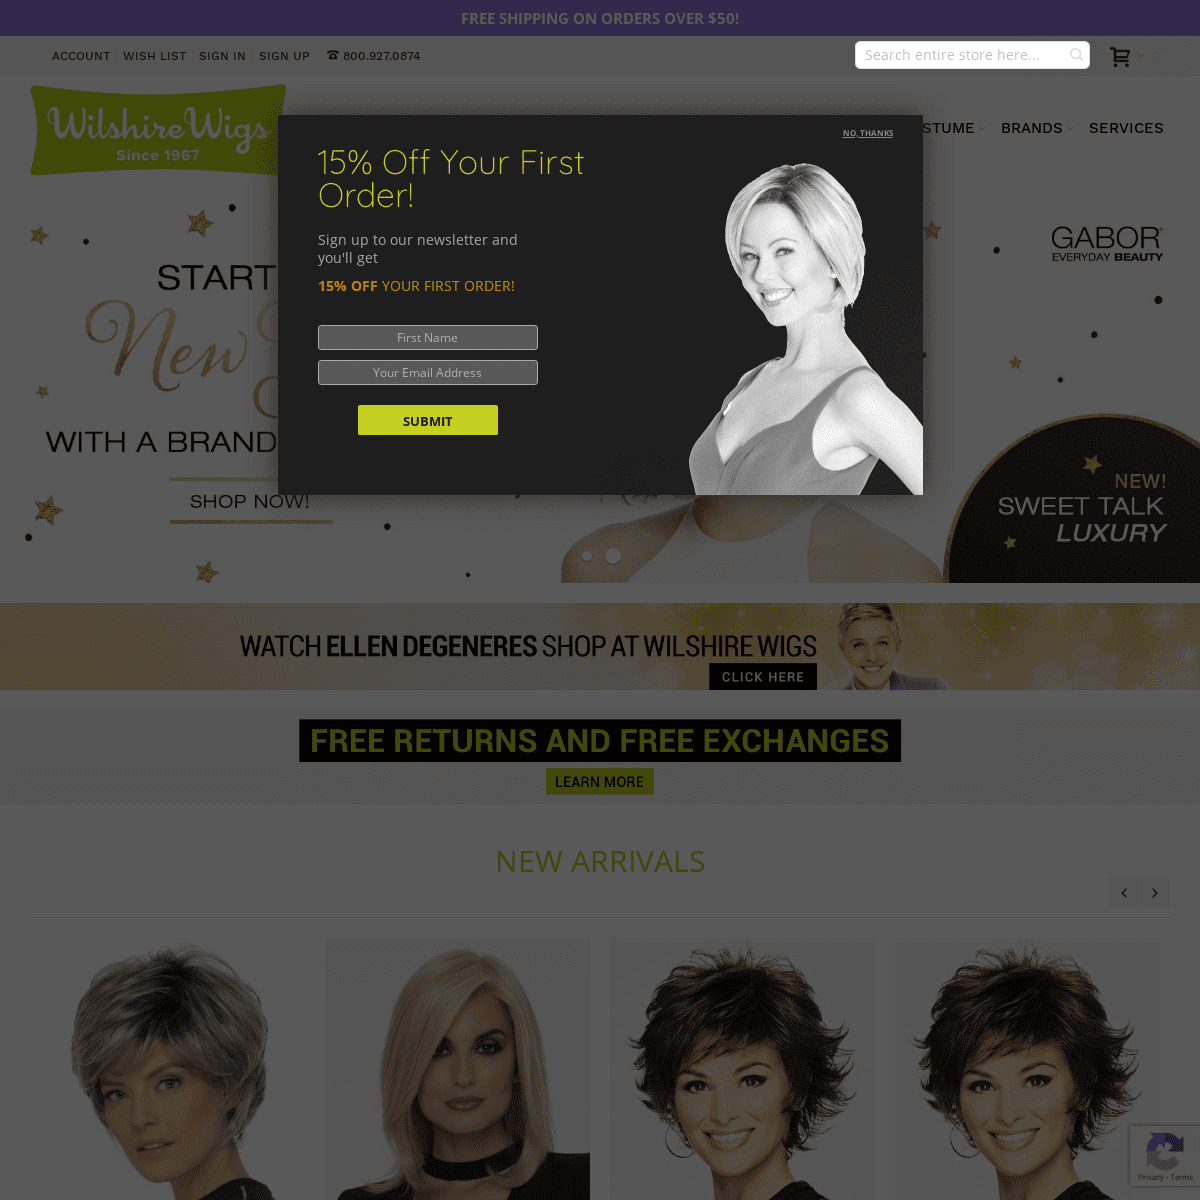 A complete backup of wilshirewigs.com